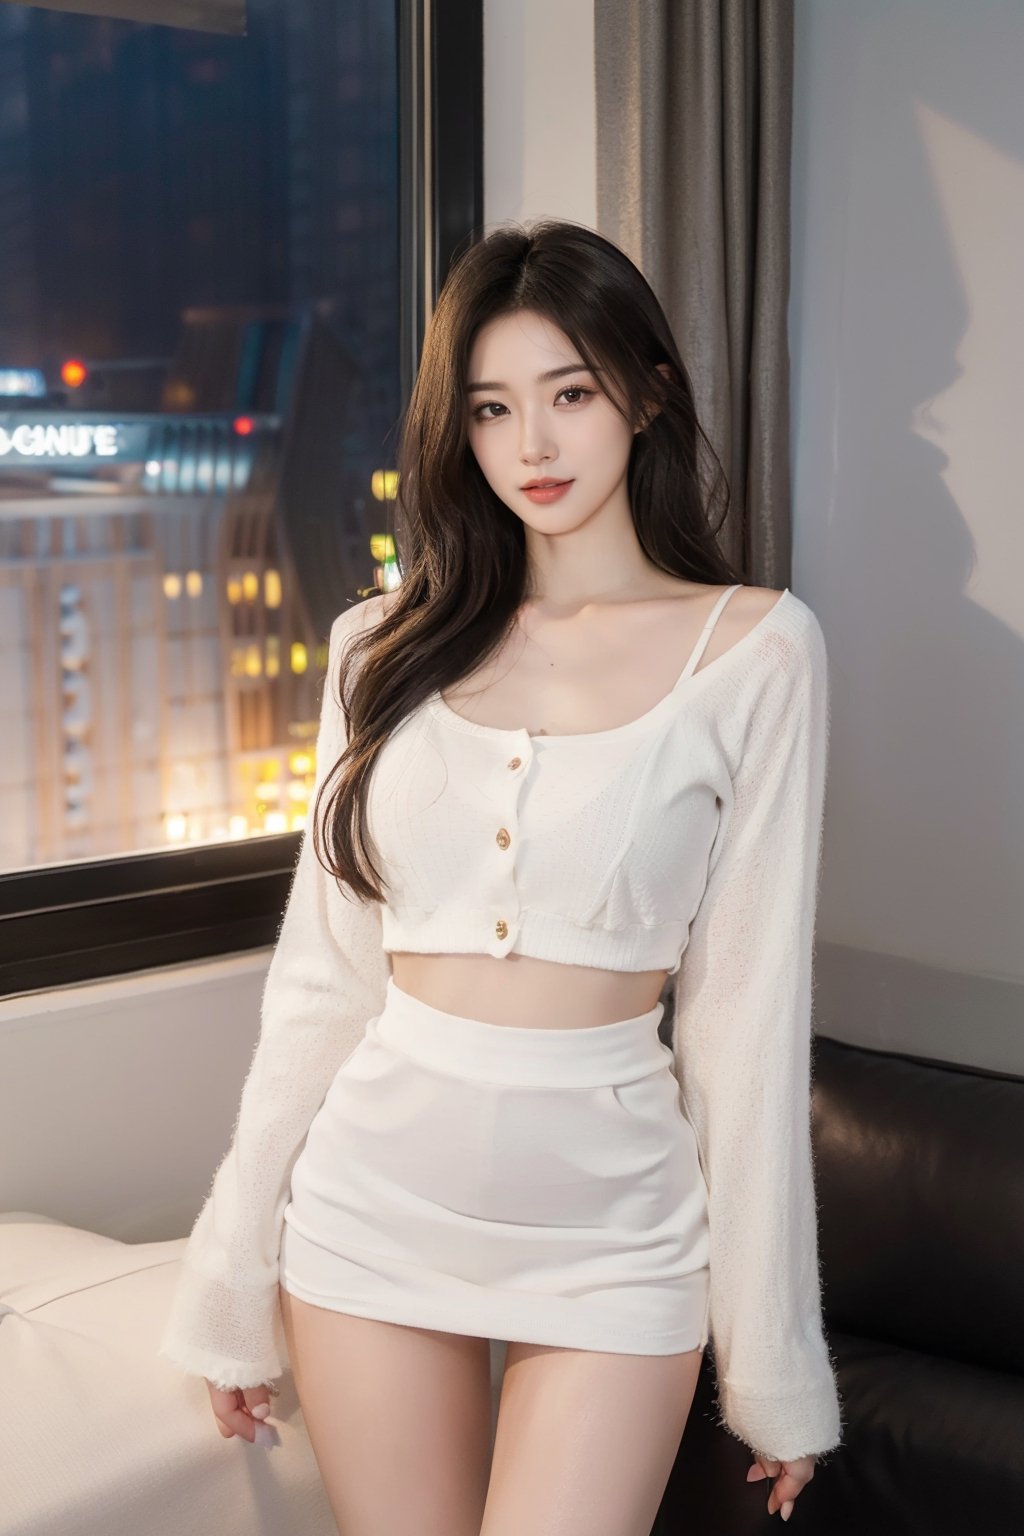 Open mouth, white teeth, tall and thin, 30-year-old elegant beauty, height 172 cm, weight 49 pounds, long black hair, C cup, ((slender body)), (slender arms), medium big breasts, ((thin) Legs, long and beautiful legs)), simple bedroom photography, miniskirt, (long-sleeved top), (dark light), warm light, window with curtains drawn, late at night